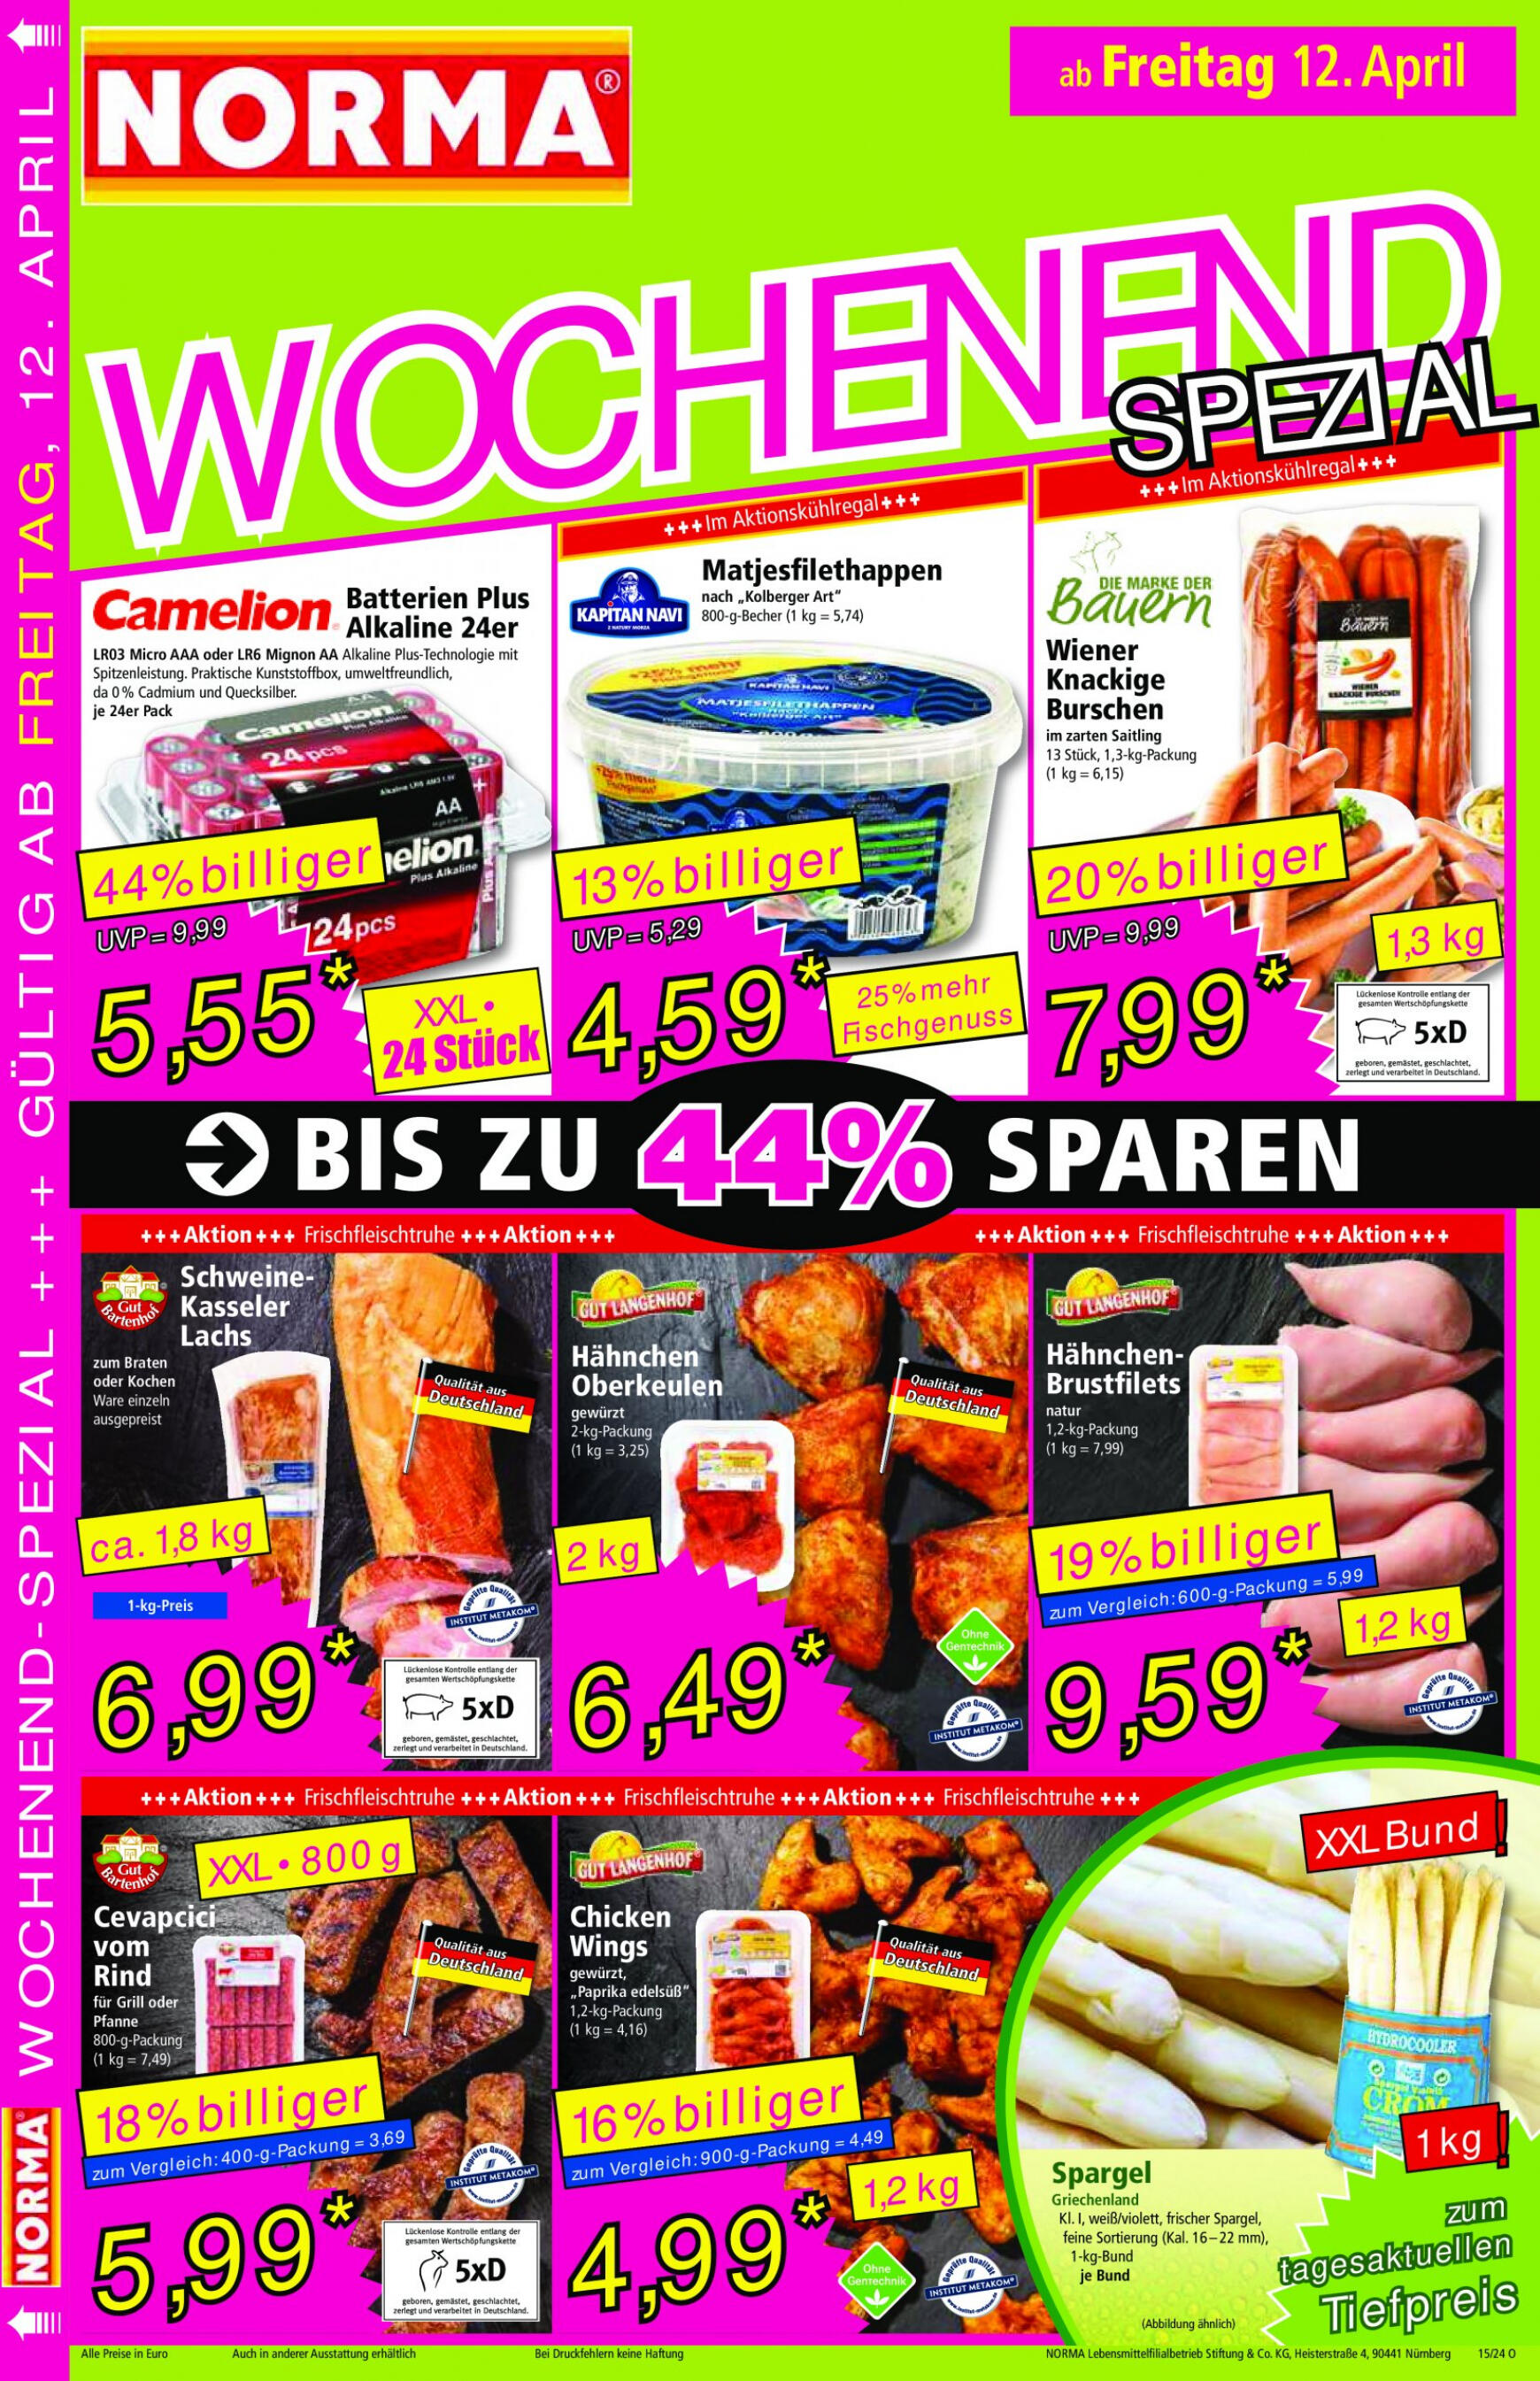 norma - Flyer Norma aktuell 08.04. - 13.04. - page: 18